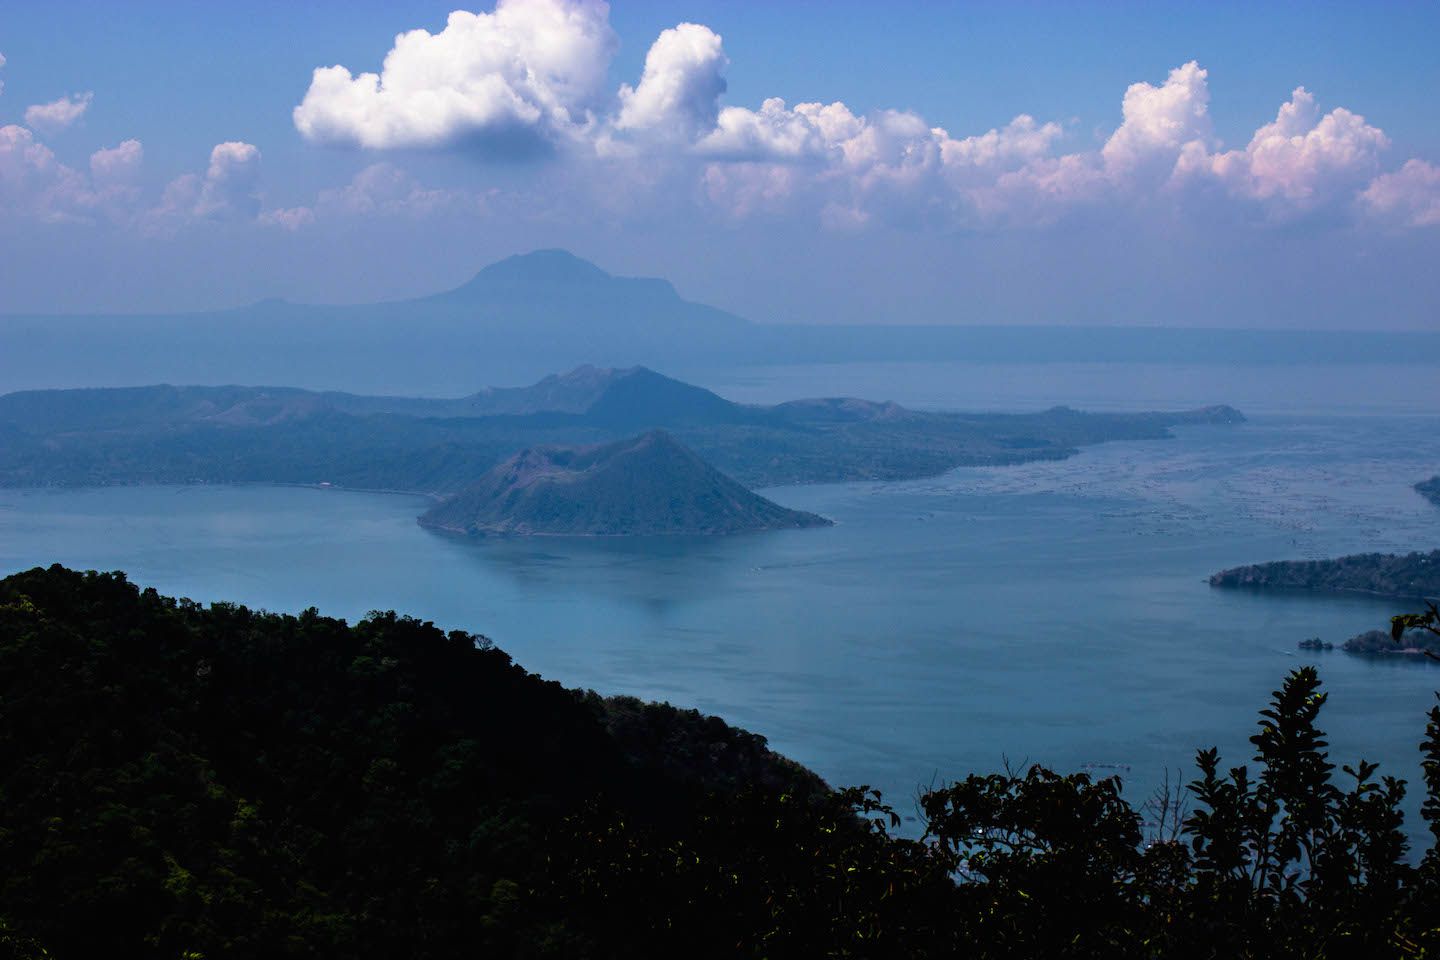 View of Taal volcano, Tagaytay, Philippines